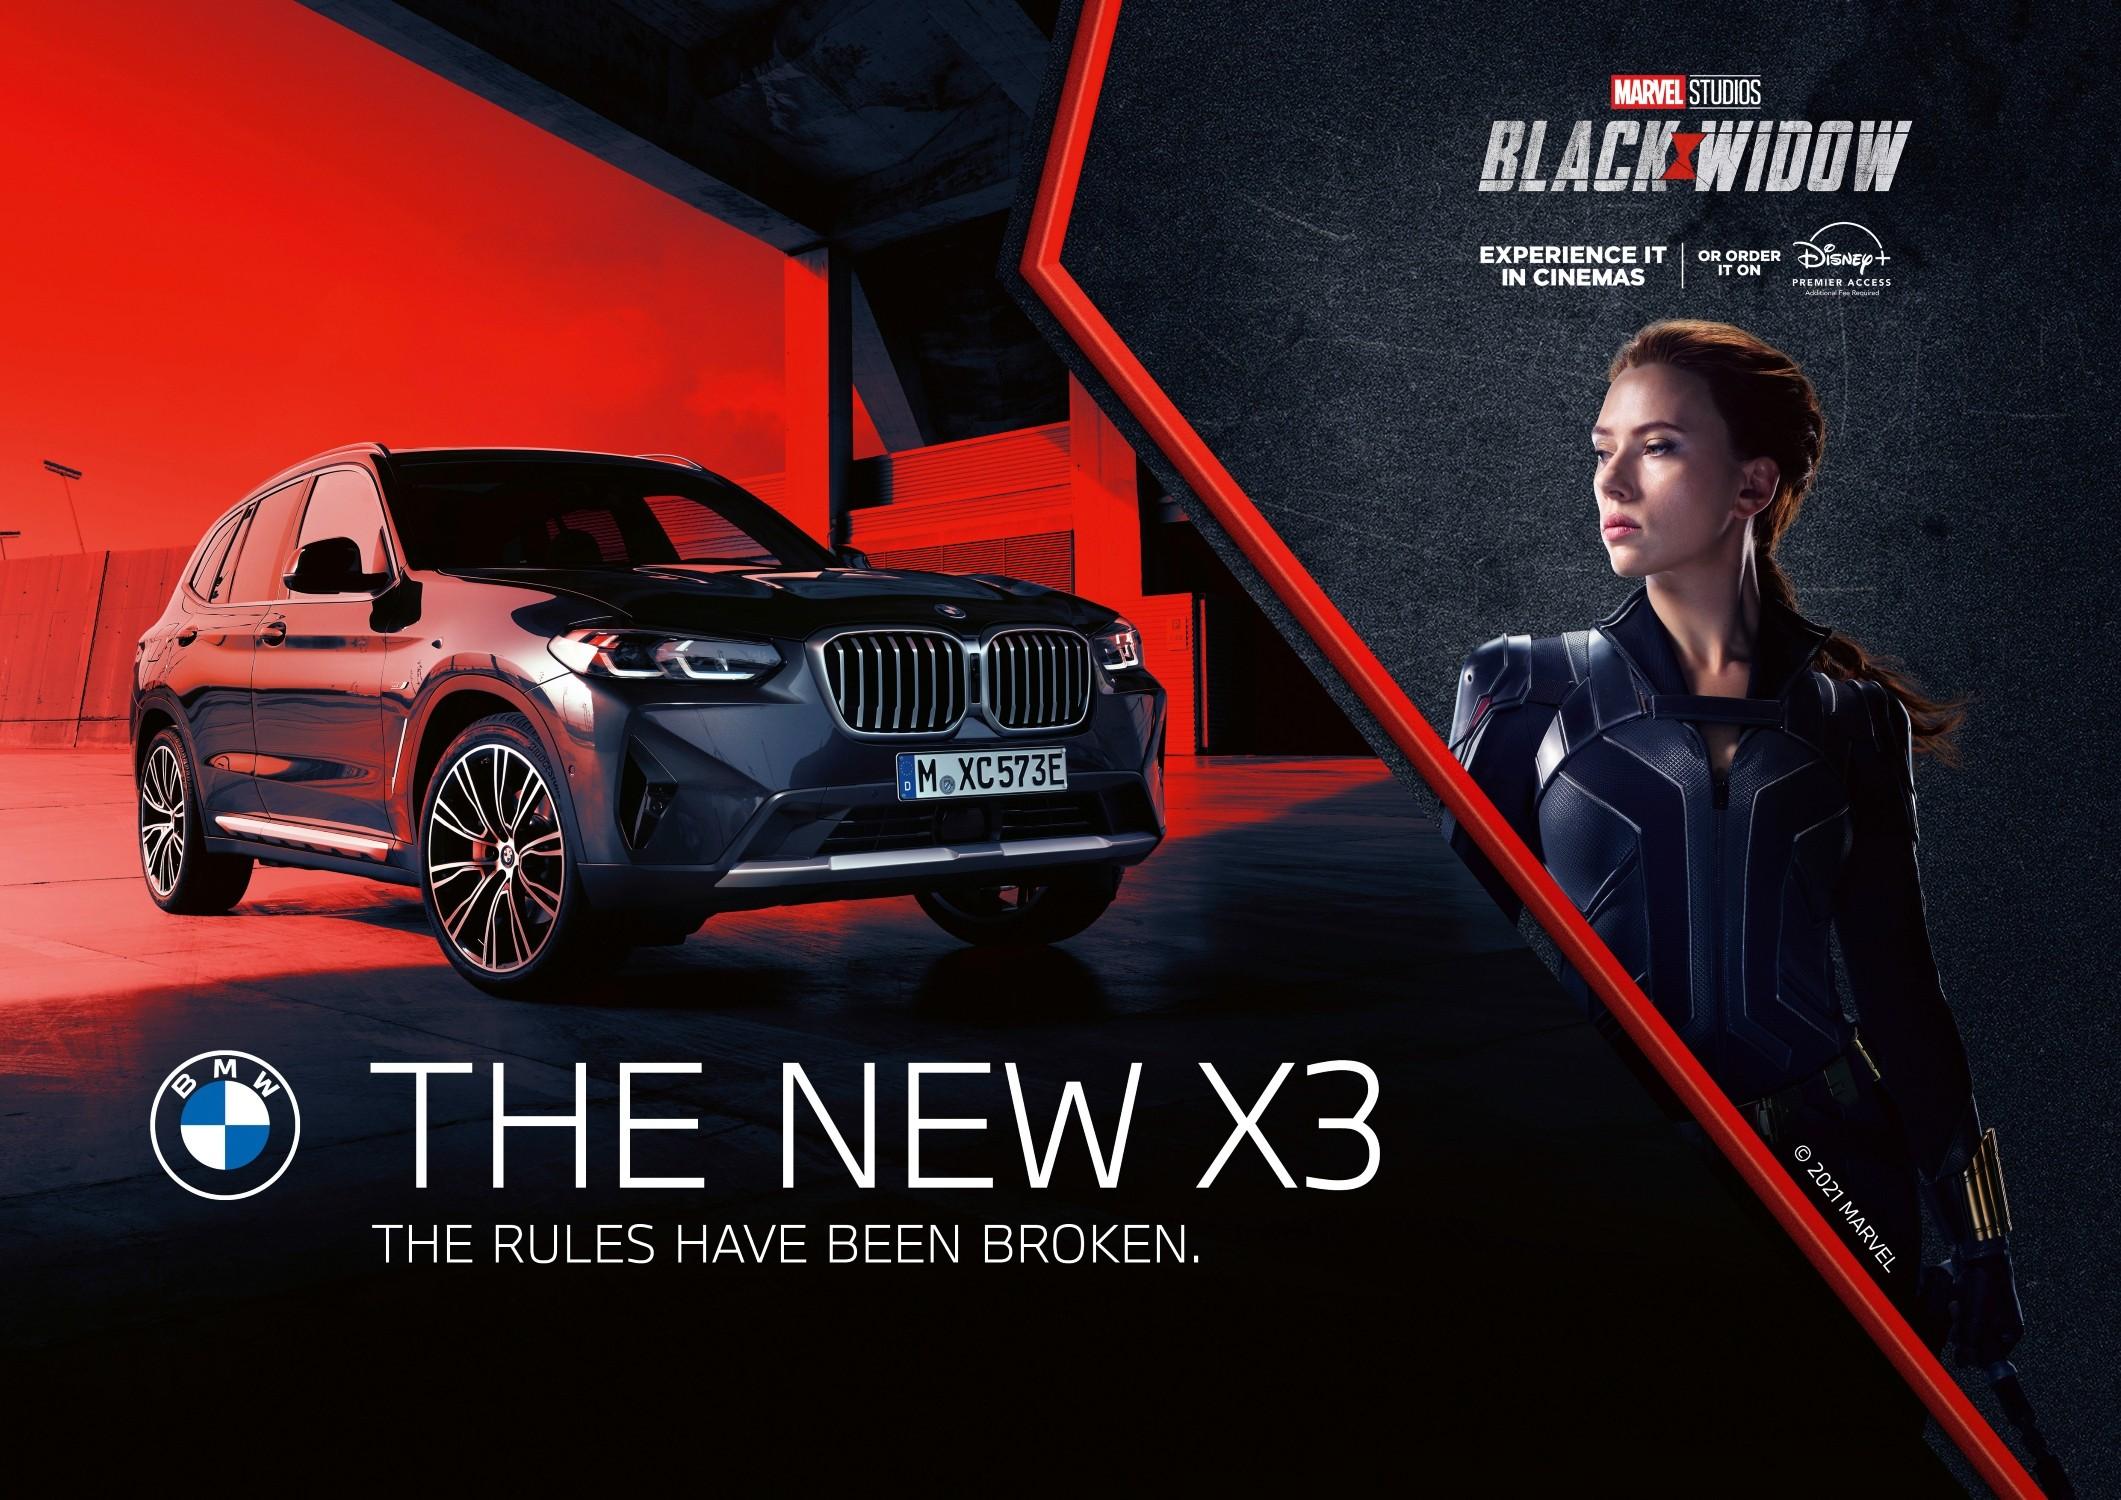 The BMW X3 will be featured in Black Widow.